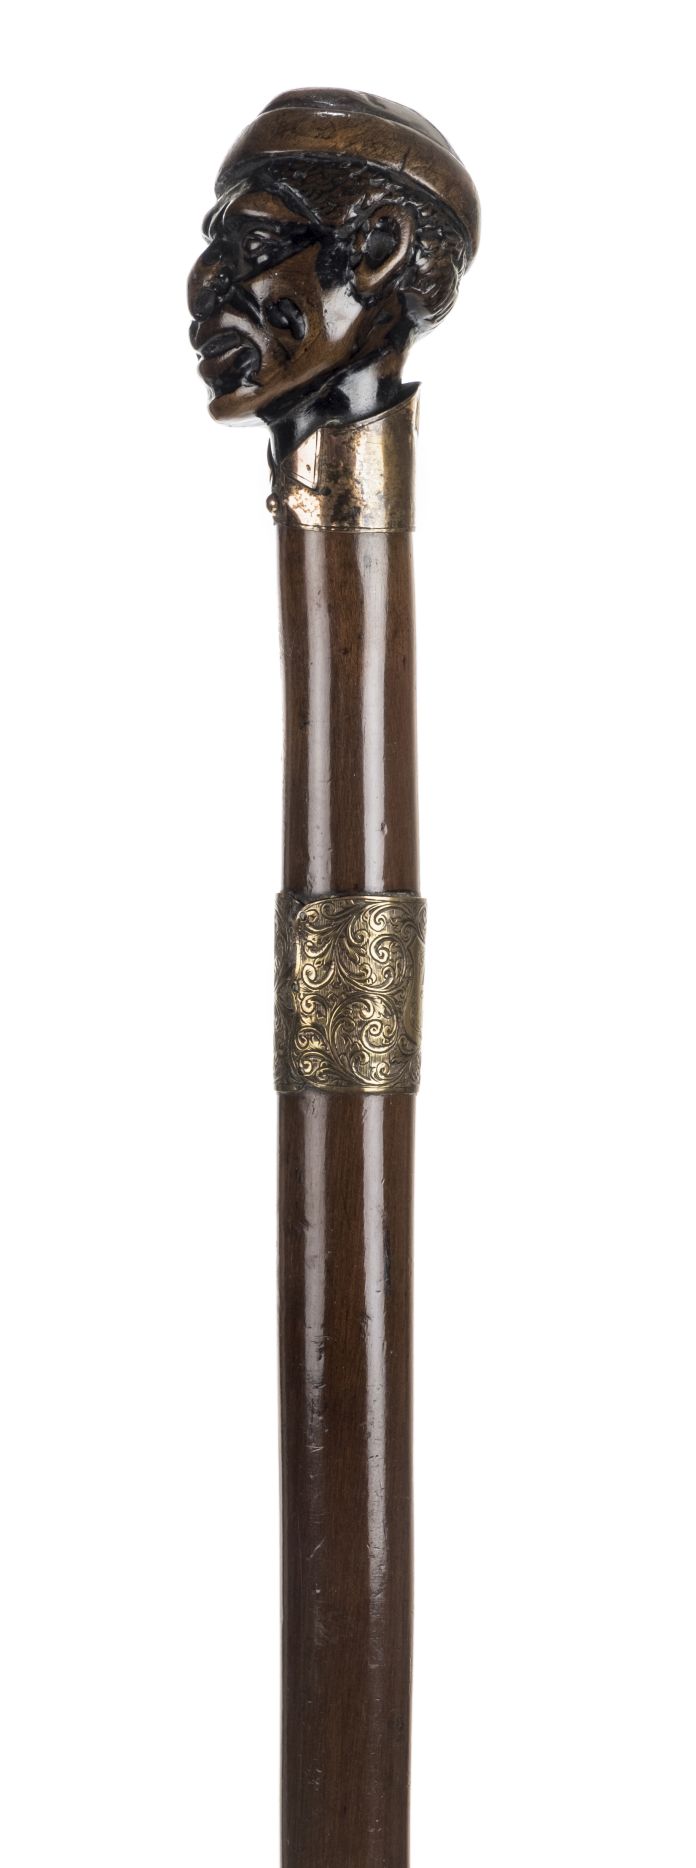 *Walking Stick. 19th century walking stick, the knop carved as a Negro wearing a tasselled hat